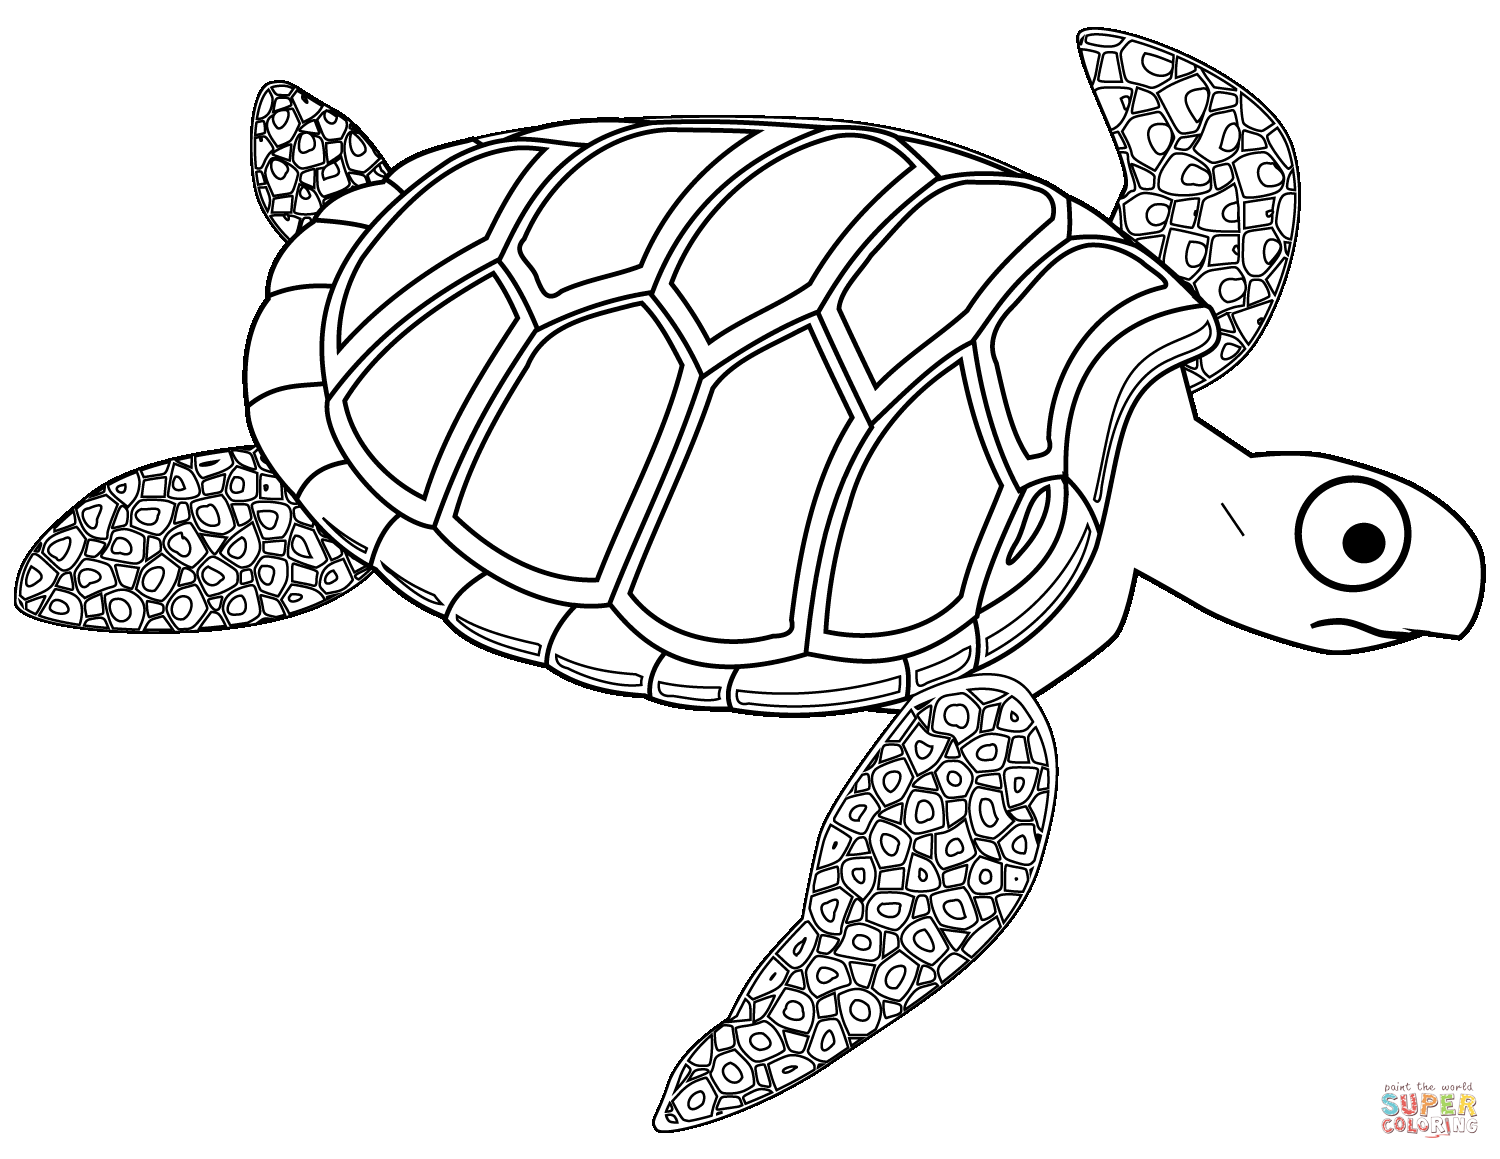 Sea turtle drawing 2 by Naomi Veitch